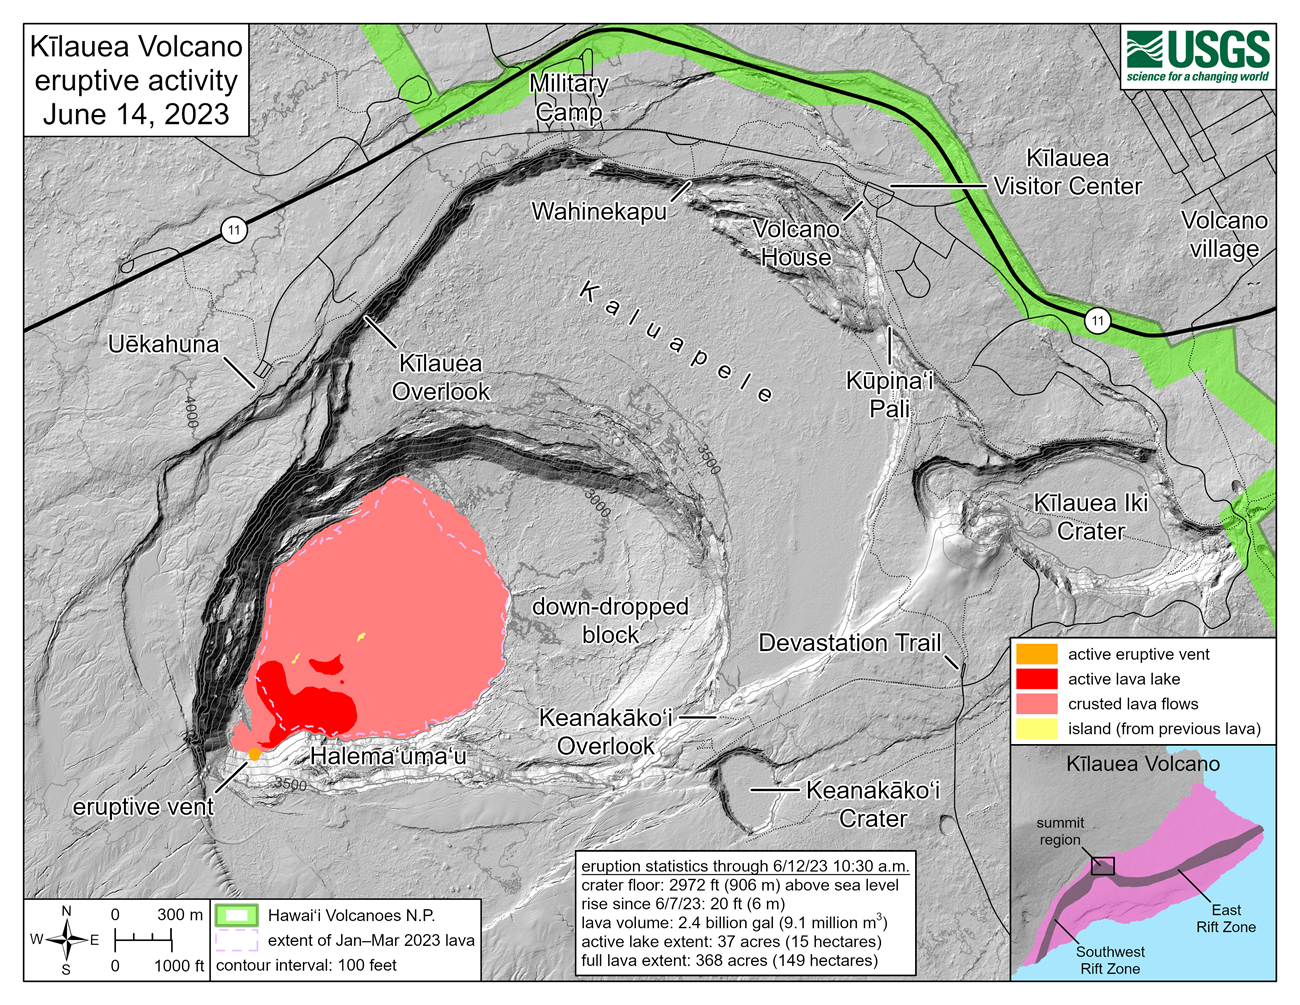 A eruptive activity map for September 2023. Map shows lava filling a larger portion of a volcanic crater in an area known as the down-dropped block. The lava filled 496 acres of the crater.